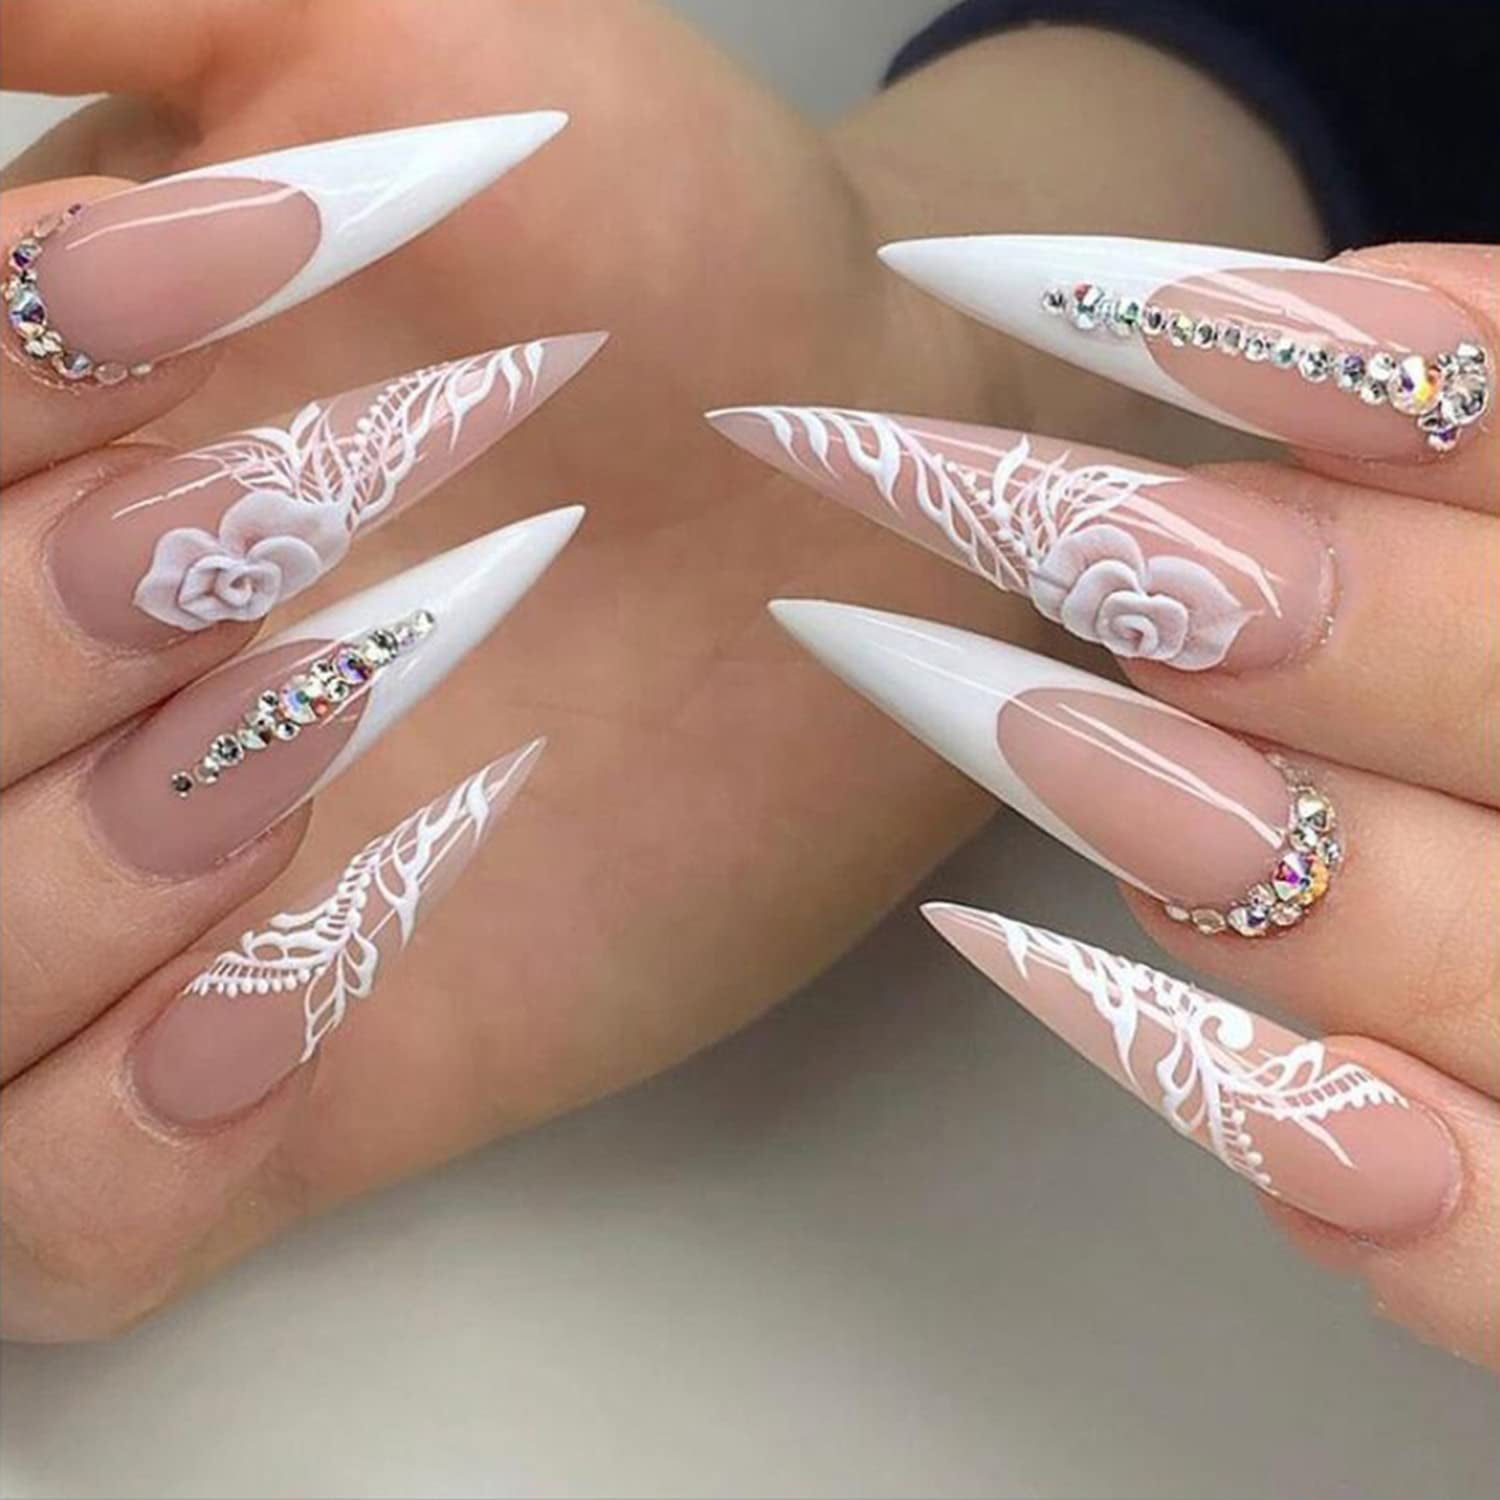 Air brush, chrome details, french tip, acrylic flowers.🫶🏼 : r/Nails